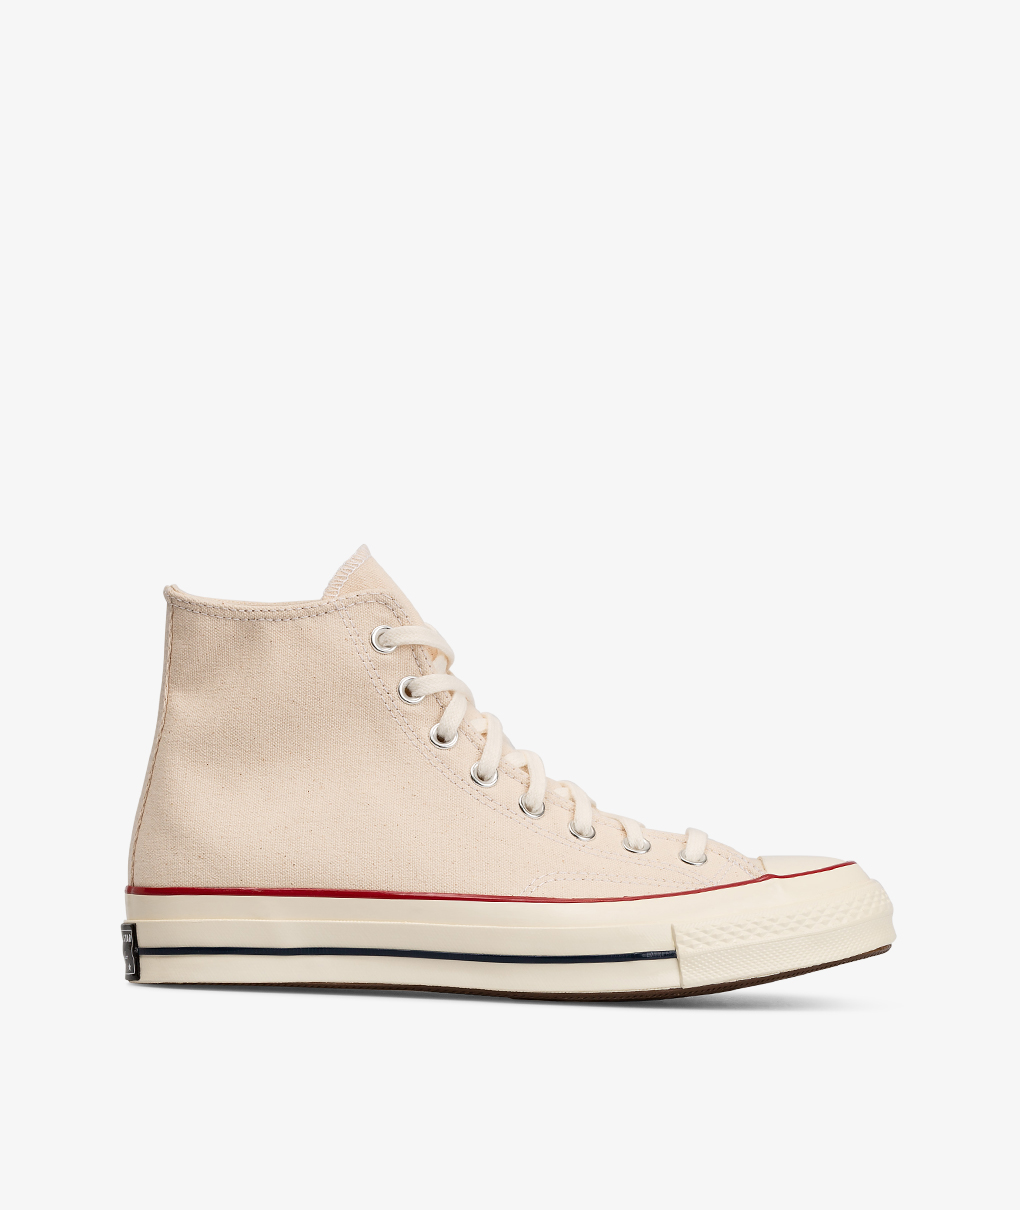 Norse Store - Chuck 70 Hi by Converse